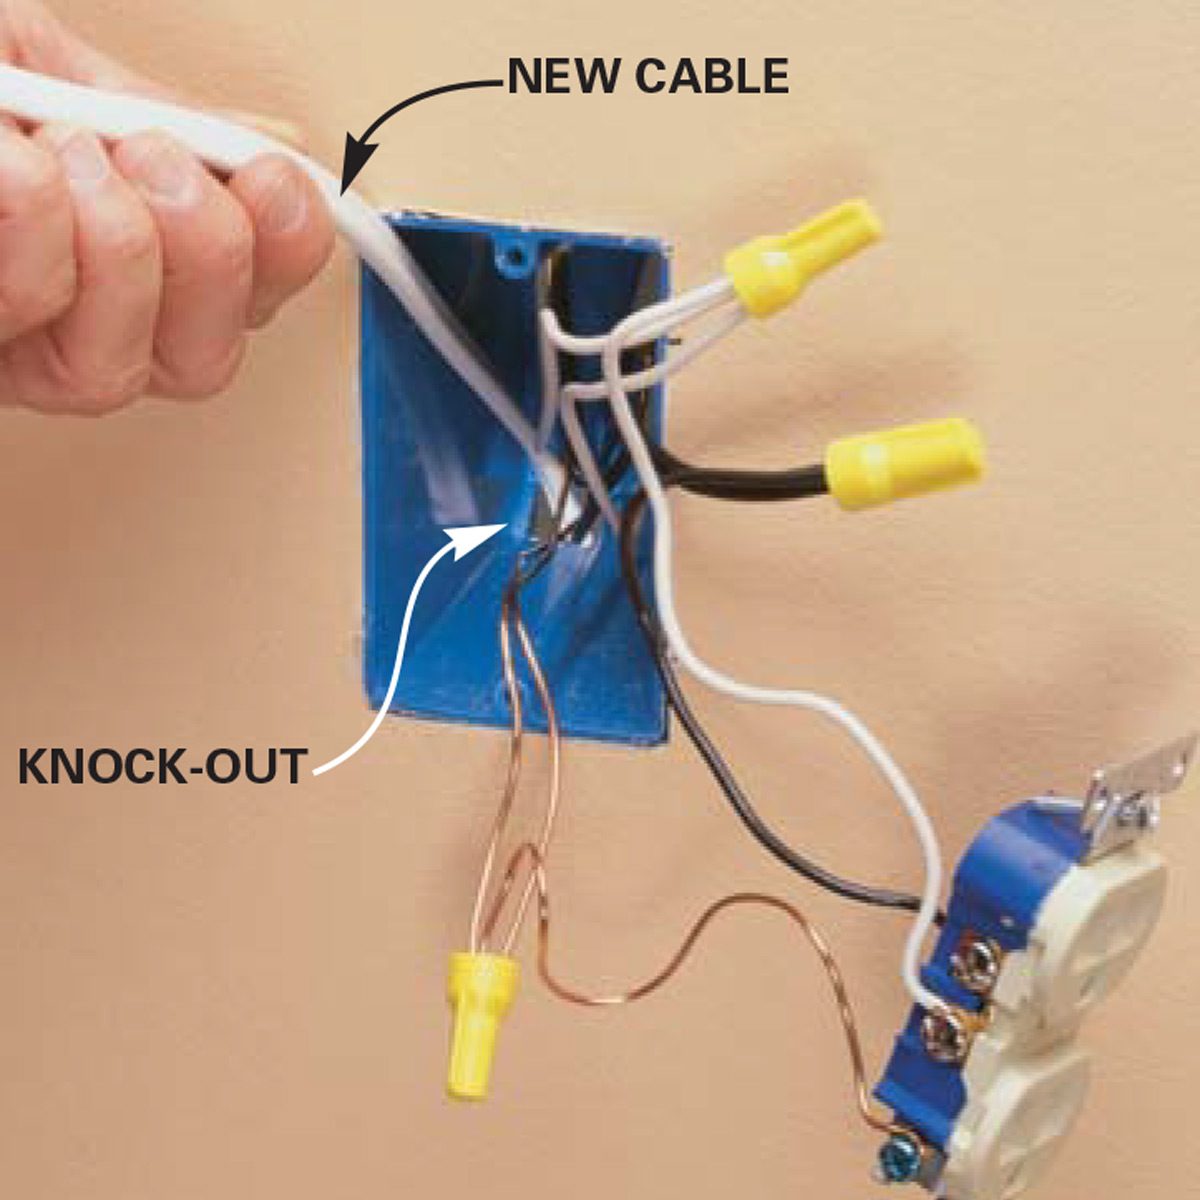 Adding an extra electrical outlet